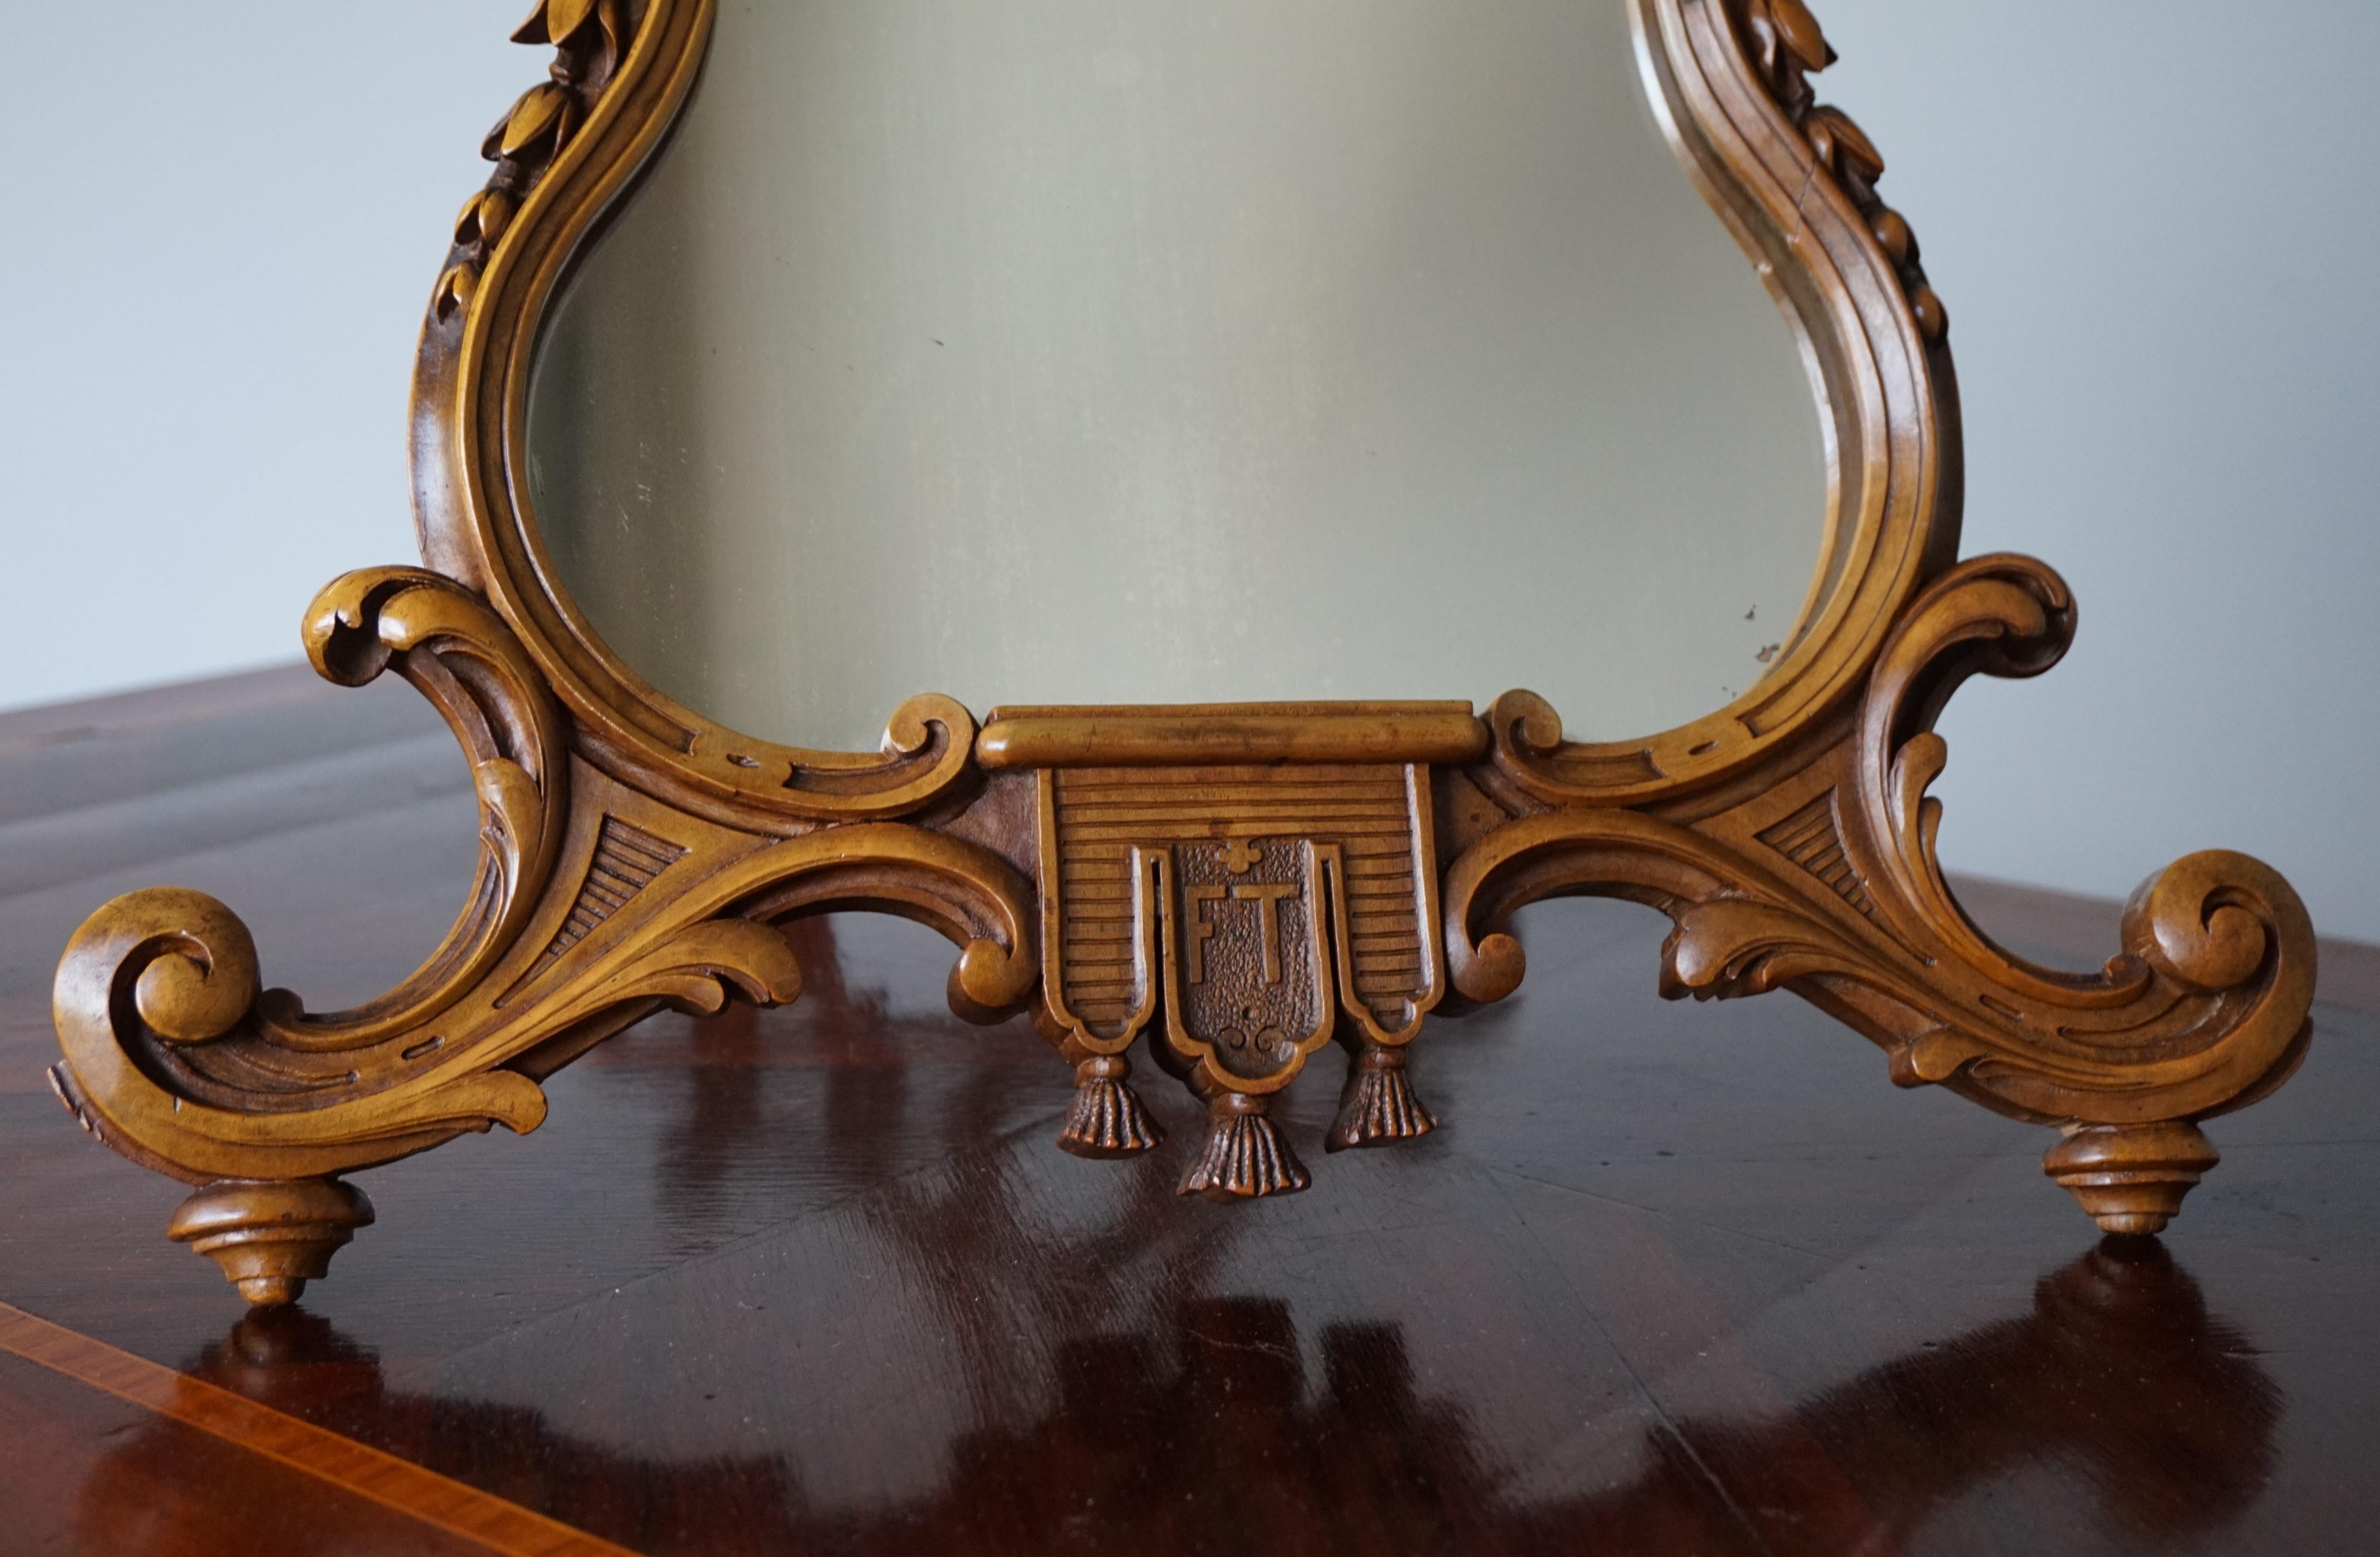 Louis XVI Stunning Hand Carved Nutwood Table Mirror by Guéret Frères, Parisian Top Makers